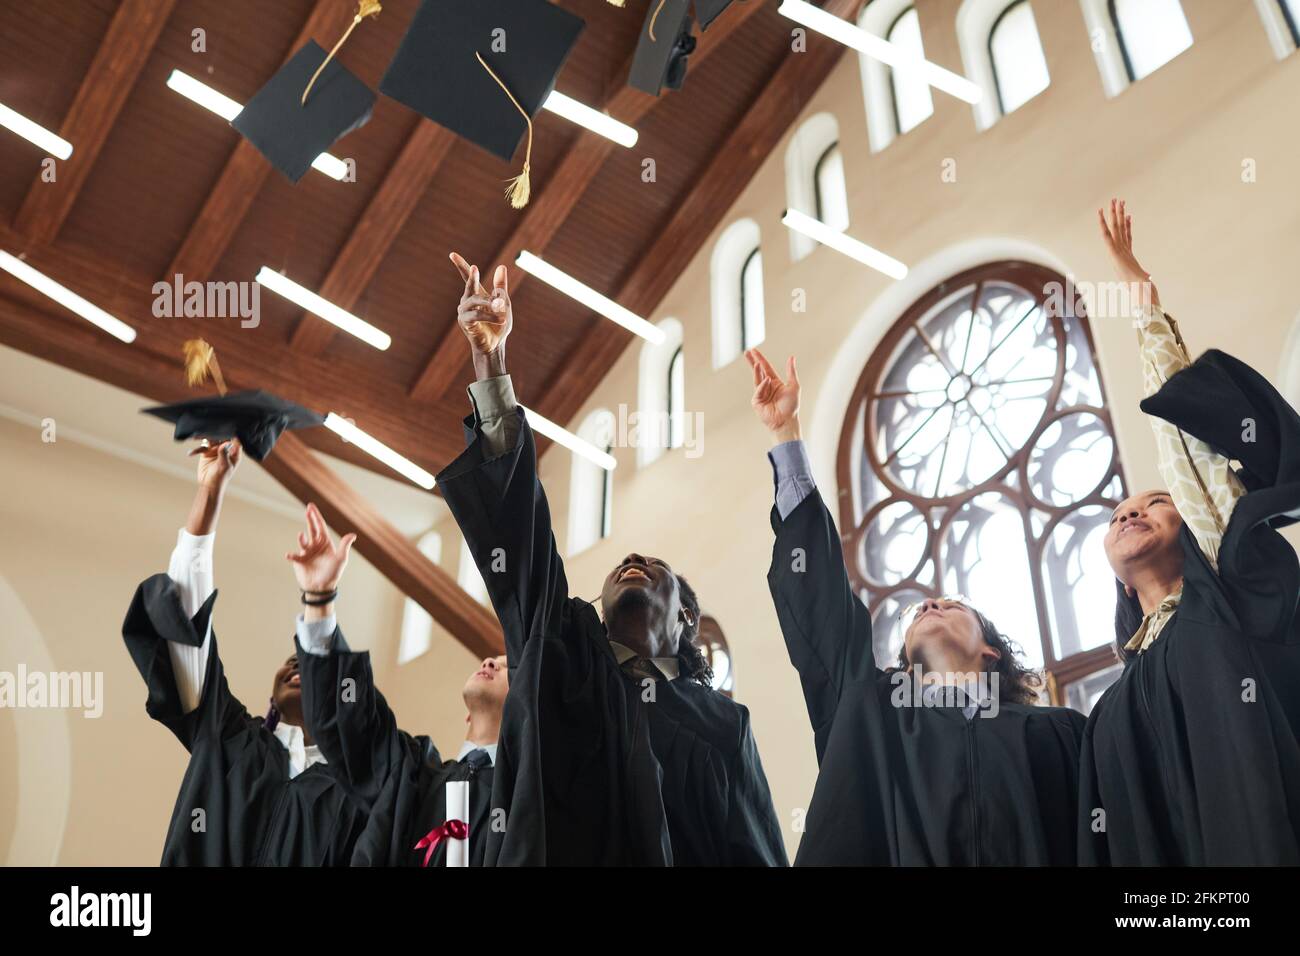 Low angle view at multi-ethnic group of young people throwing caps in air during graduation ceremony indoors in classic school auditorium, copy space Stock Photo